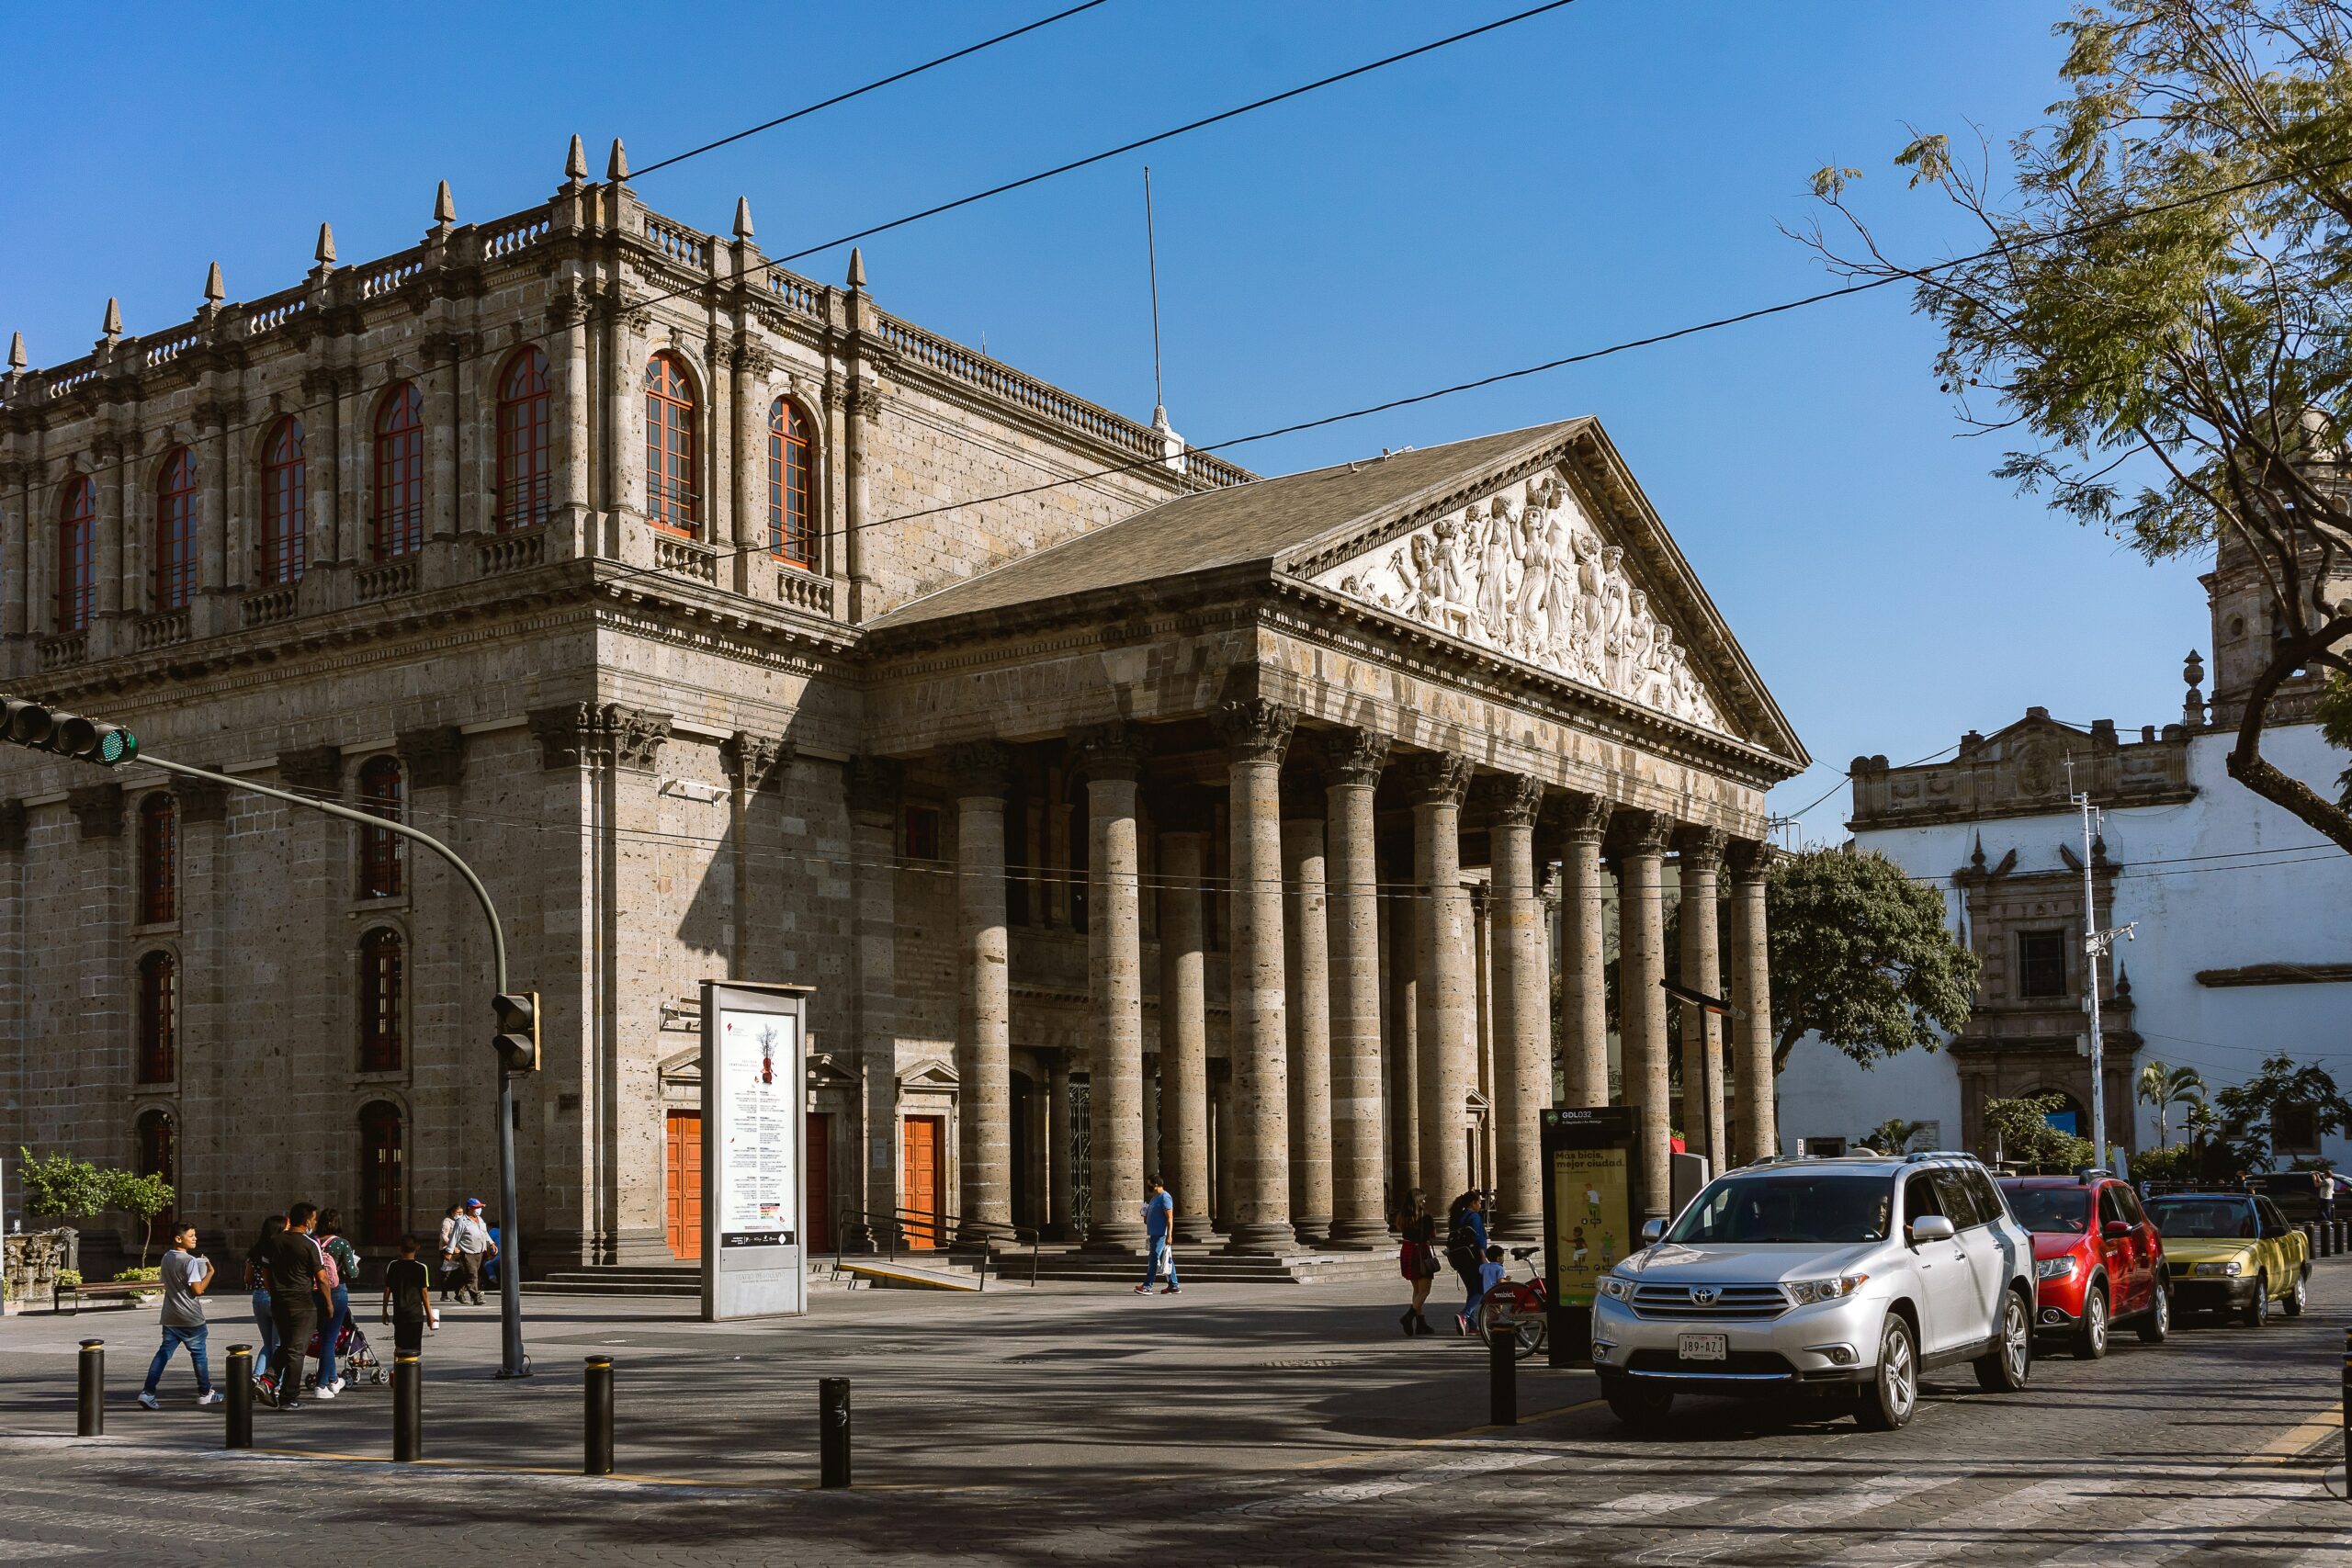 Guadalajara has public transportation that is accessible and makes exploring the city easier and safer. 
pictured: a historic building in Guadalajara with many pedestrians exploring the area on foot 